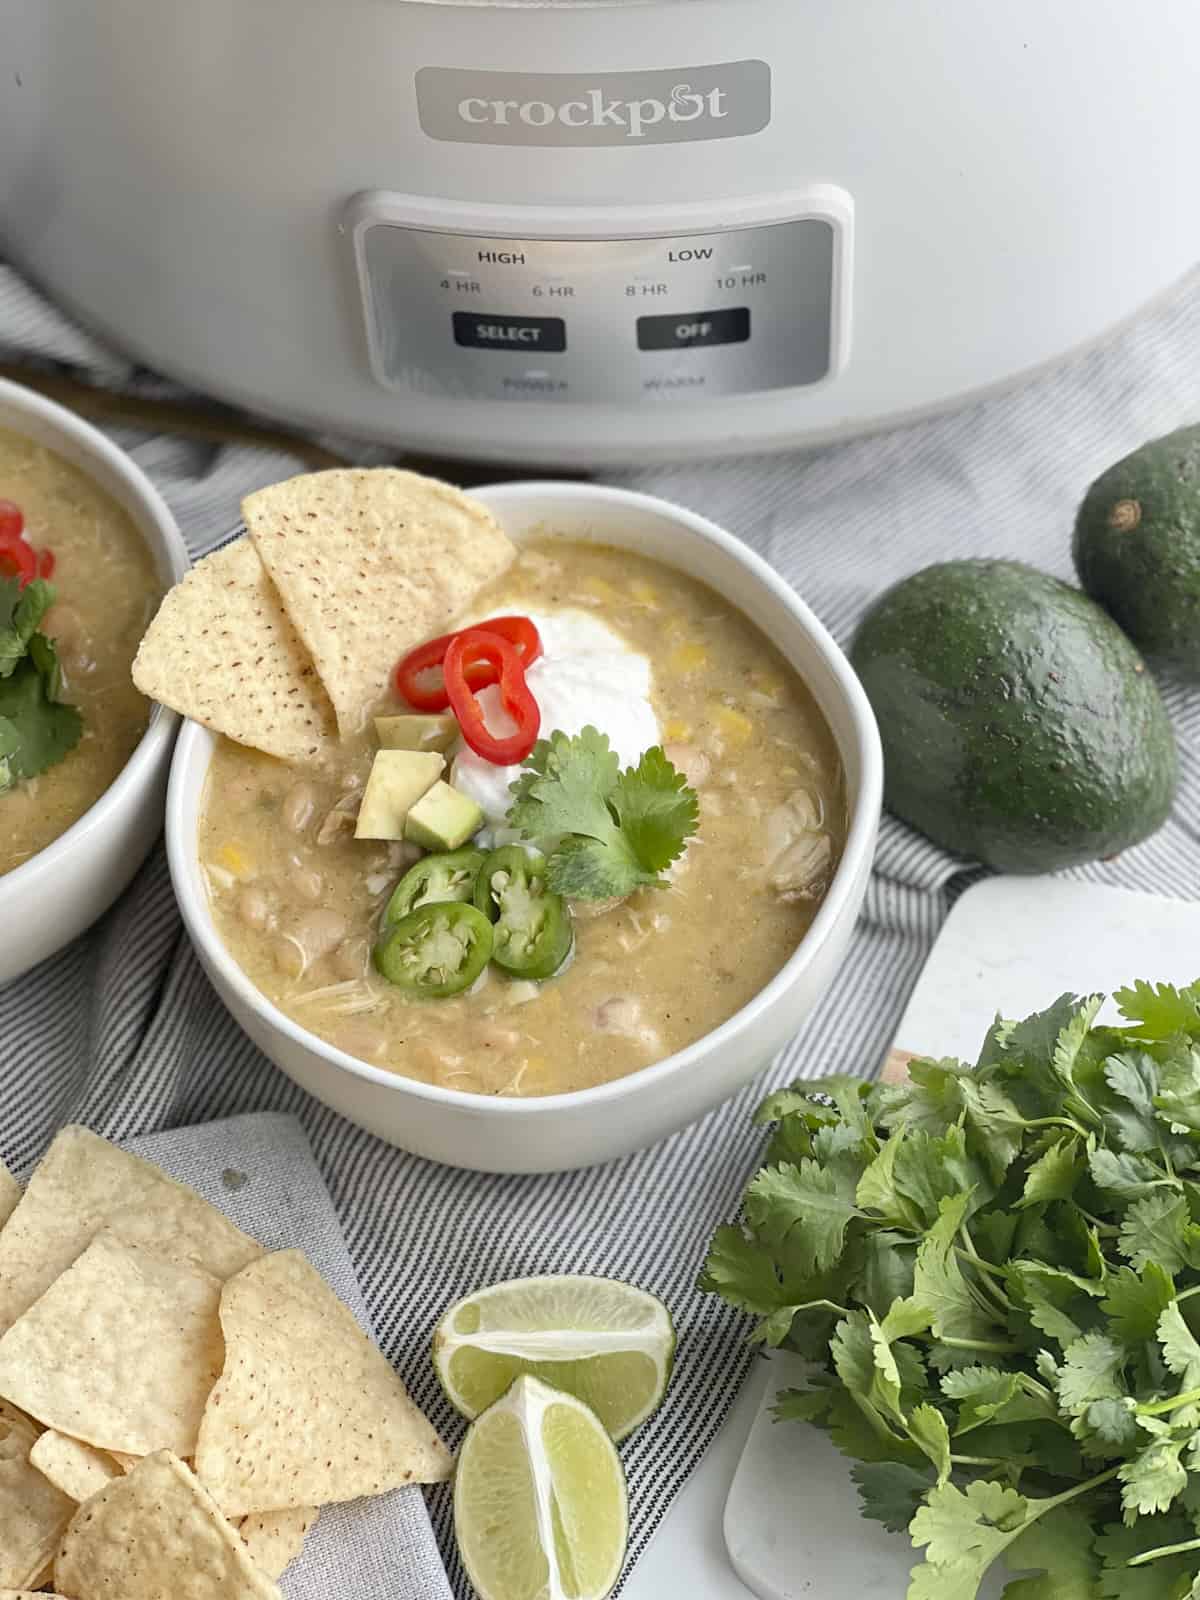 one bowl of white chicken chili with sour cream, avocado, jalapeño, and tortilla chips. pictured with crockpot.